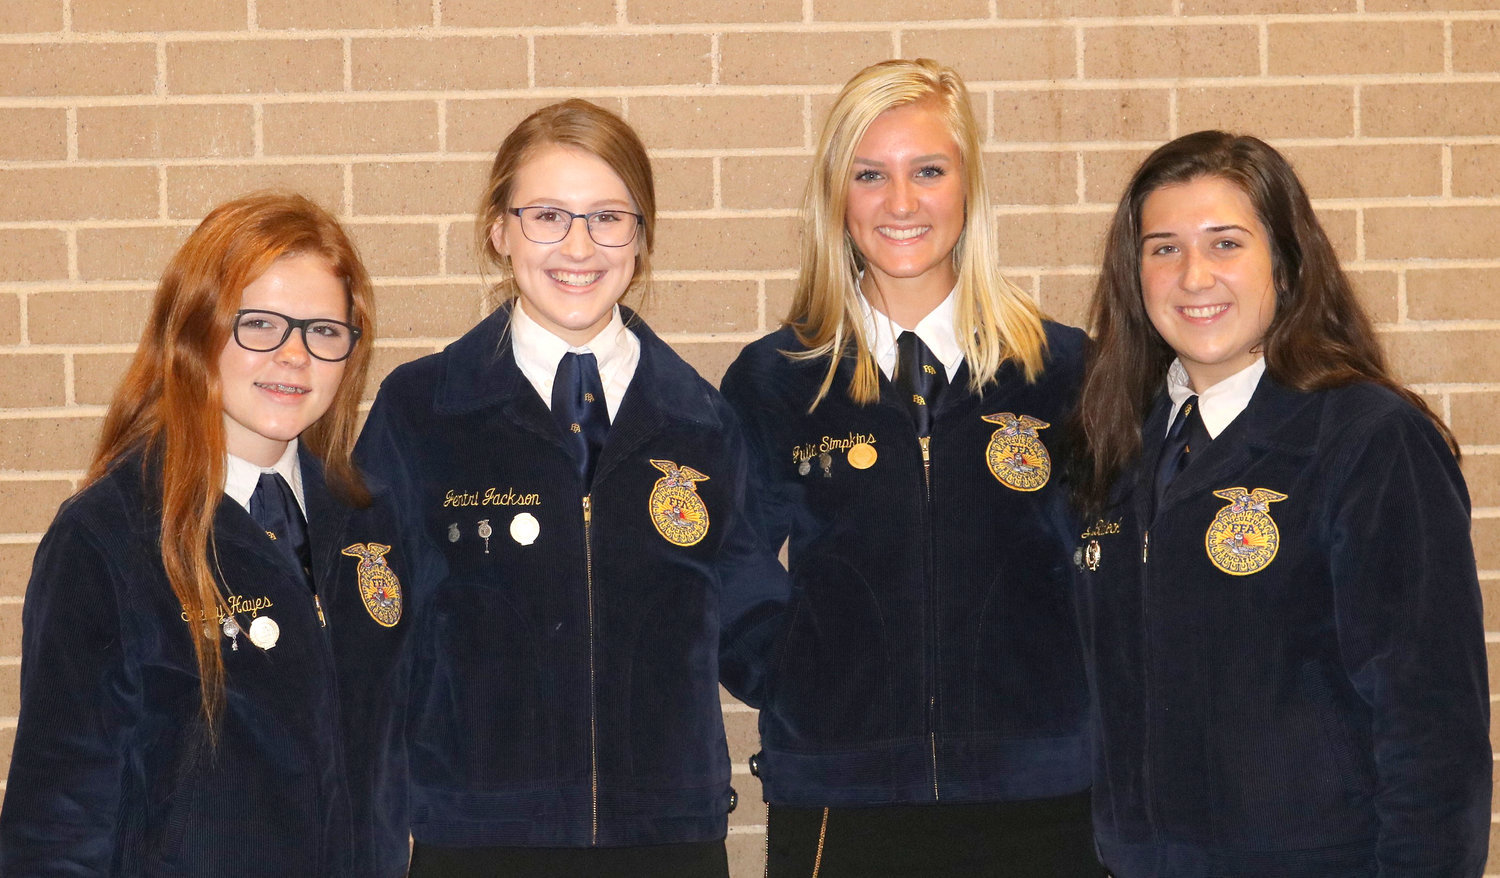 From left, Shelby Hayes, Jentri Jackson, Julia Simpkins, Jordyn Blalock and not pictured Aleigh Farnham earned the Texas FFA Lone Star degrees at the 91st Annual Texas FFA State Convention in Fort Worth from July 15 to 19. (Photo courtesy of Vanessa Simpkins)